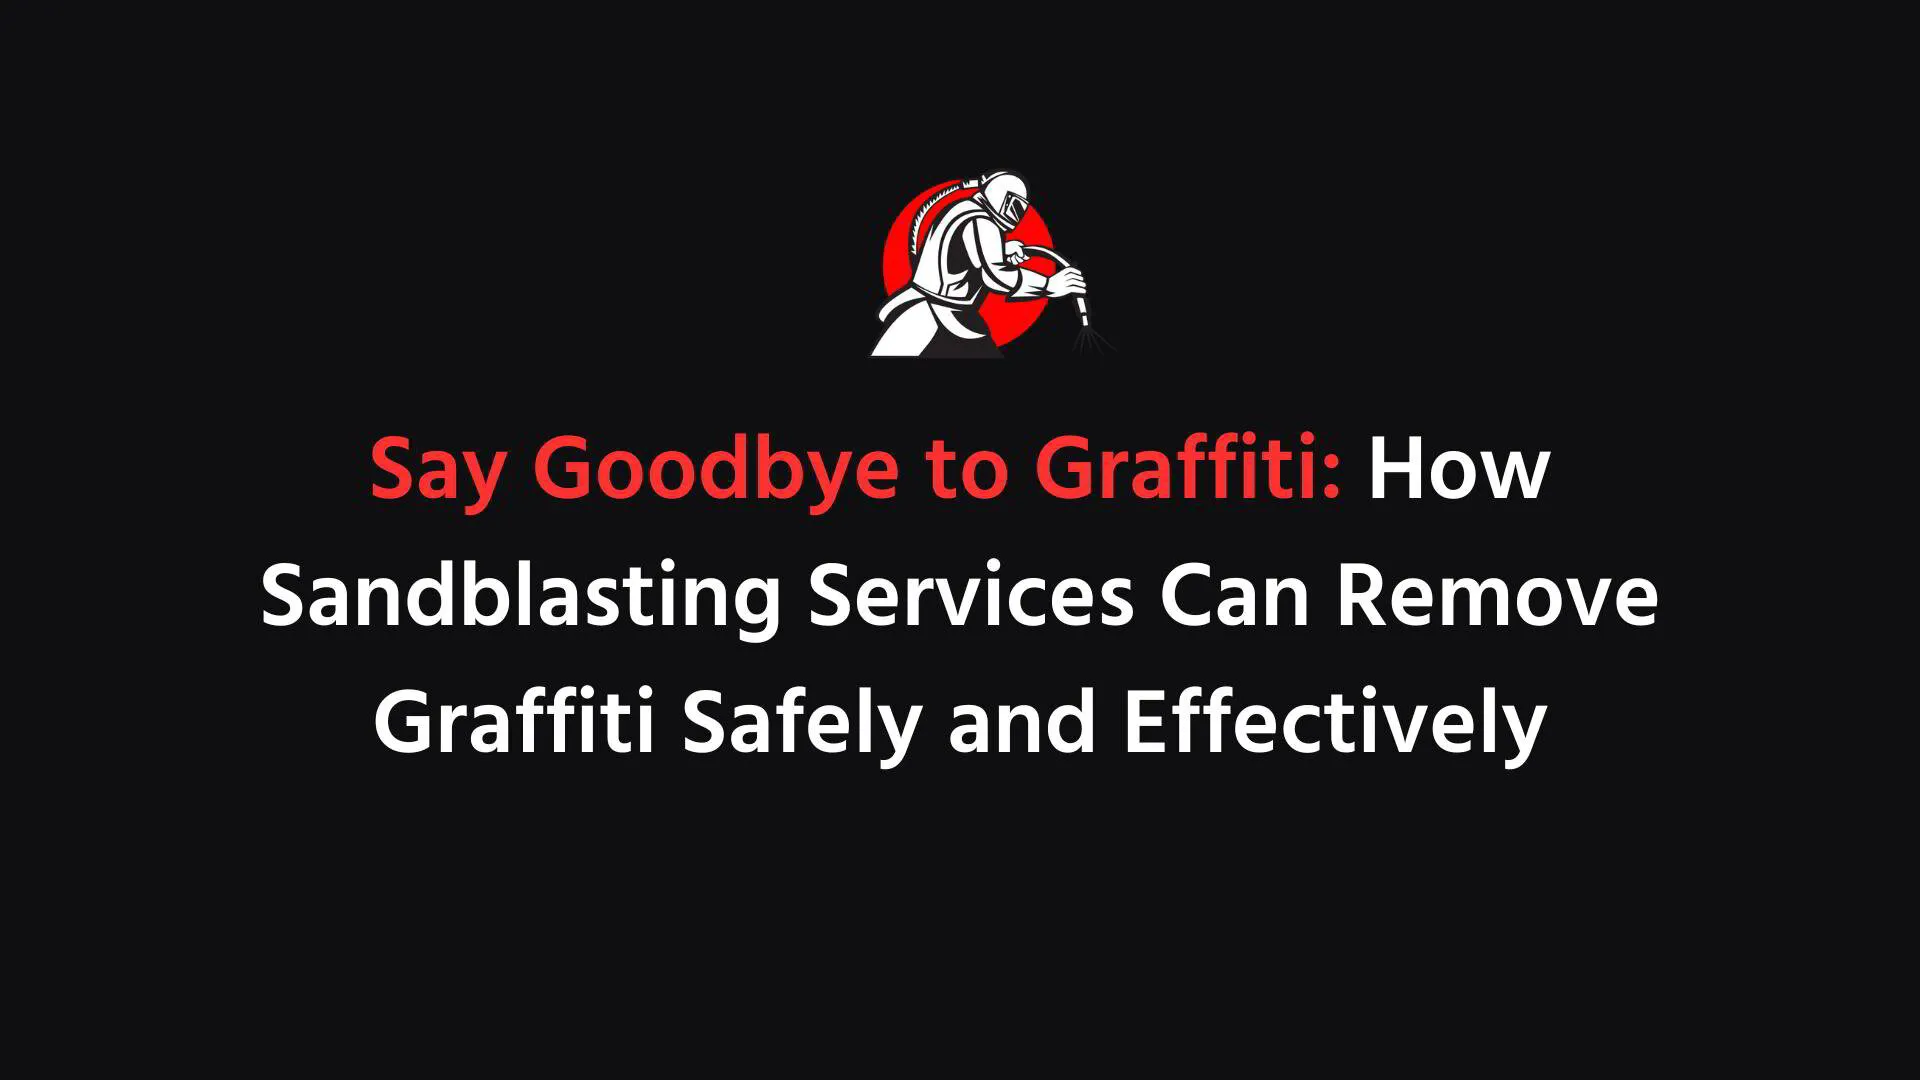 Say Goodbye to Graffiti: How Sandblasting Services Can Remove Graffiti Safely and Effectively